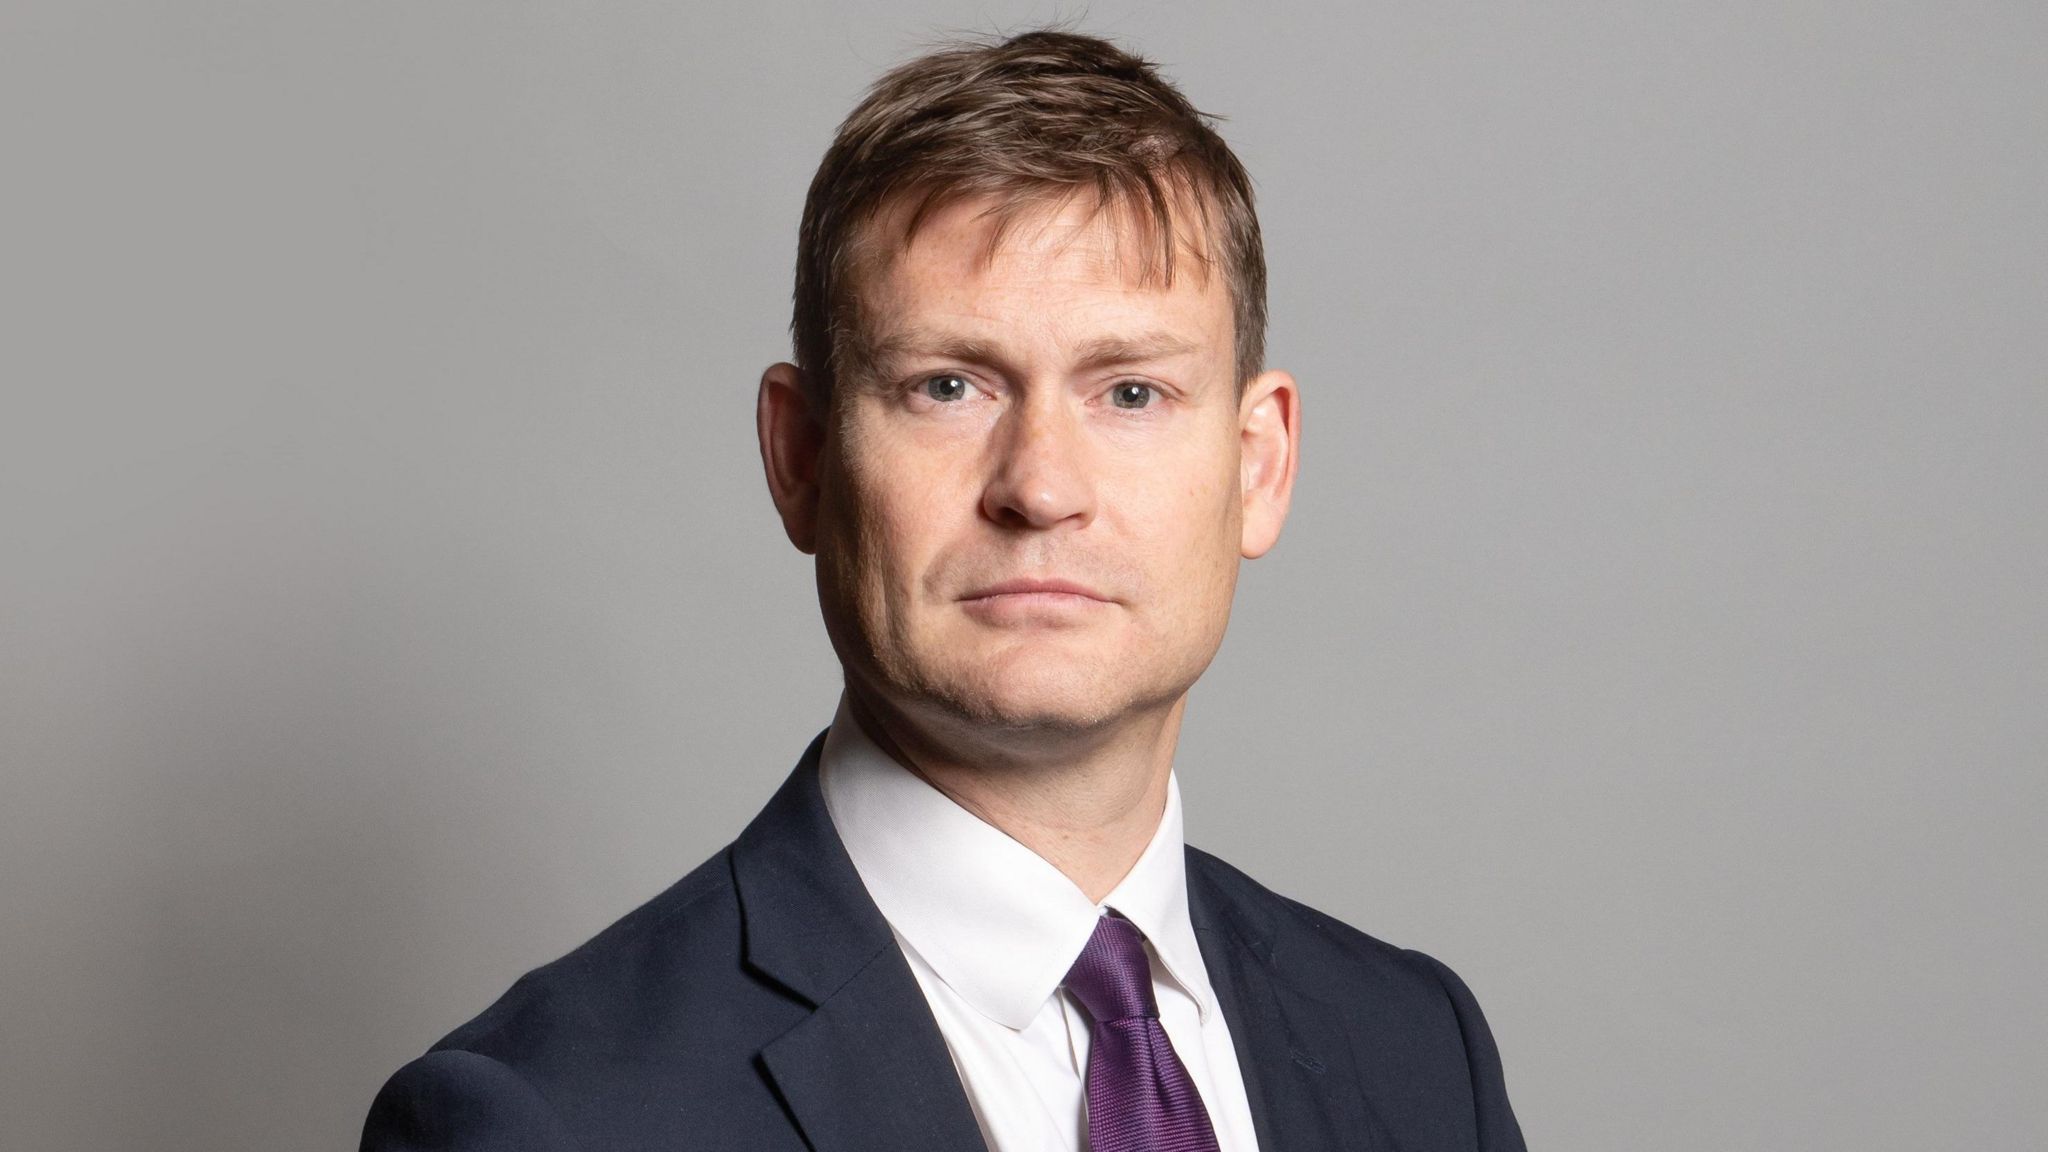 Justin Madders, the Labour MP for Ellesmere Port and Neston